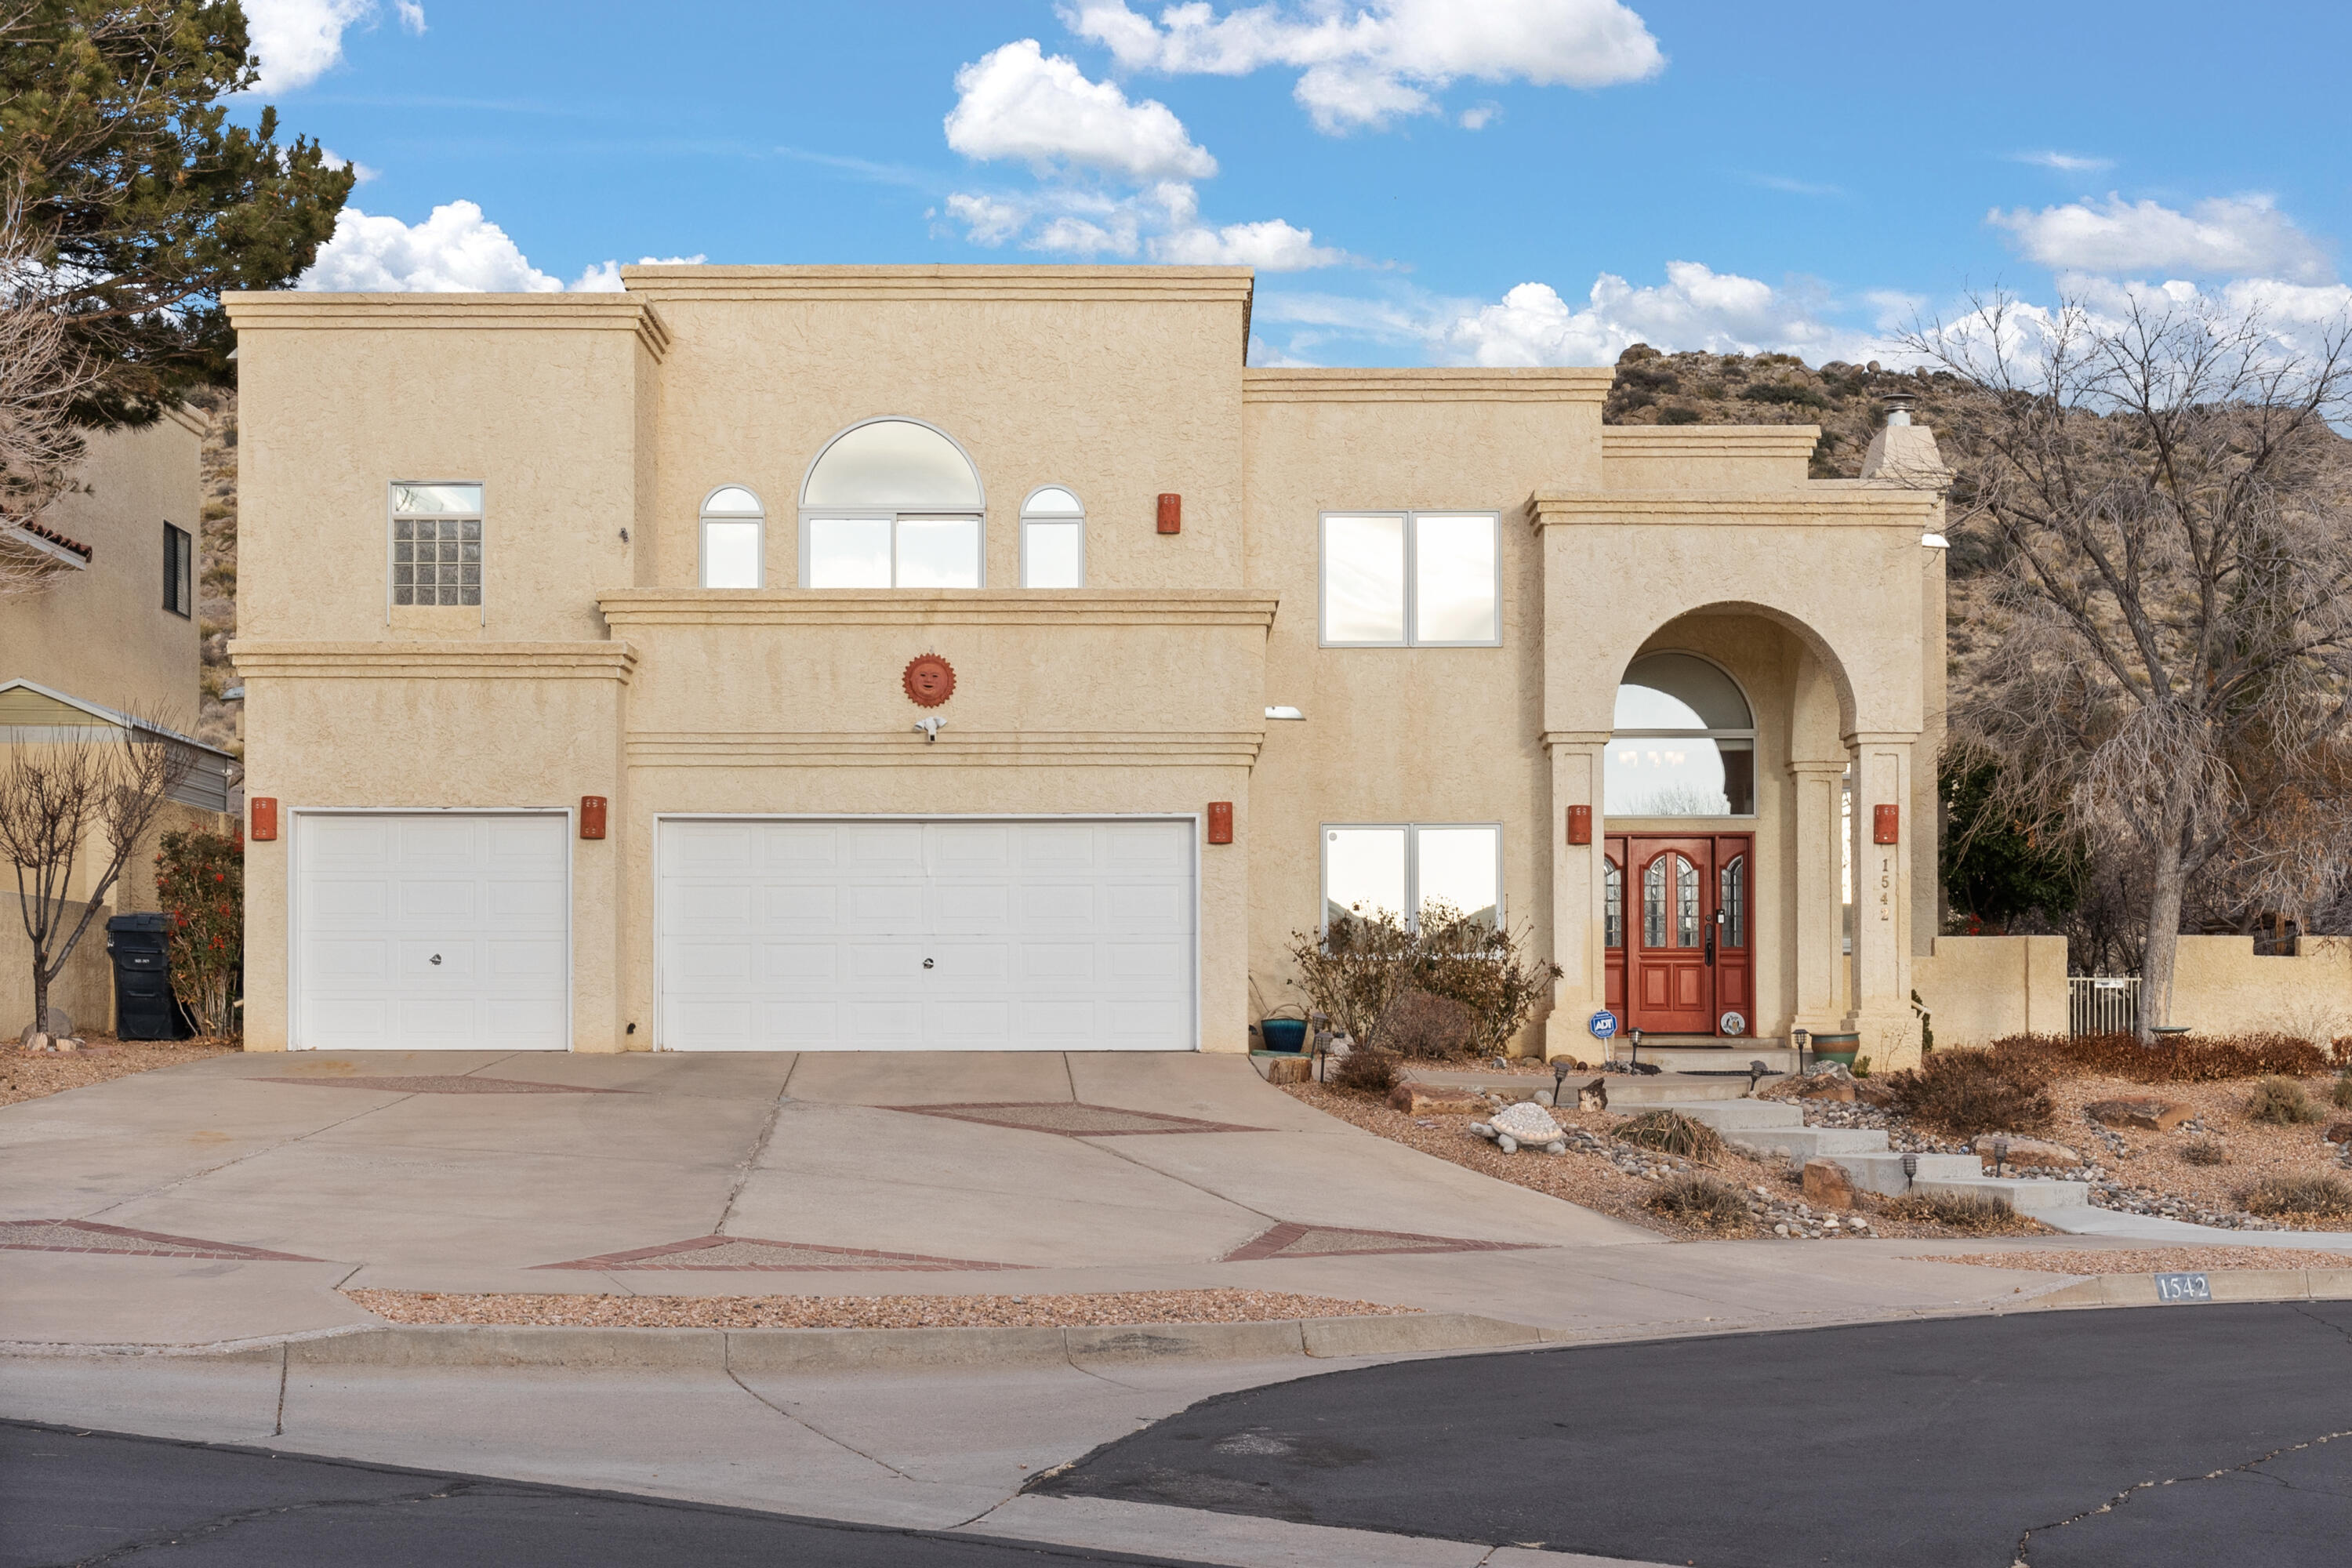 Nestled in the foothills, backing to open space, this beautiful 4BDR/3 FULL BATH/3CG has incredible views of the Sandia Mtns! One bdr/bath or office/exercise room on the main level! Two living areas w/cozy gas fireplaces, formal dining, soaring ceilings, walls of windows, skylights, & balconies w/incredible views!  Entertainer's kitchen w/granite countertops, island/bar, pantry, gas cooktop, built -in wall oven & wine rack. Master suite features a balcony, walk-in closet, jetted tub, sep shower & separate office/study! Stargaze in the hot tub, enjoy your morning coffee with the sunrise, relax in the evenings w/ tranquil sunsets, entertain family & friends in this amazing outdoor living space with open patio, rose bushes, honeysuckle, fig & ash trees, easy care turf!  Explore nature trai